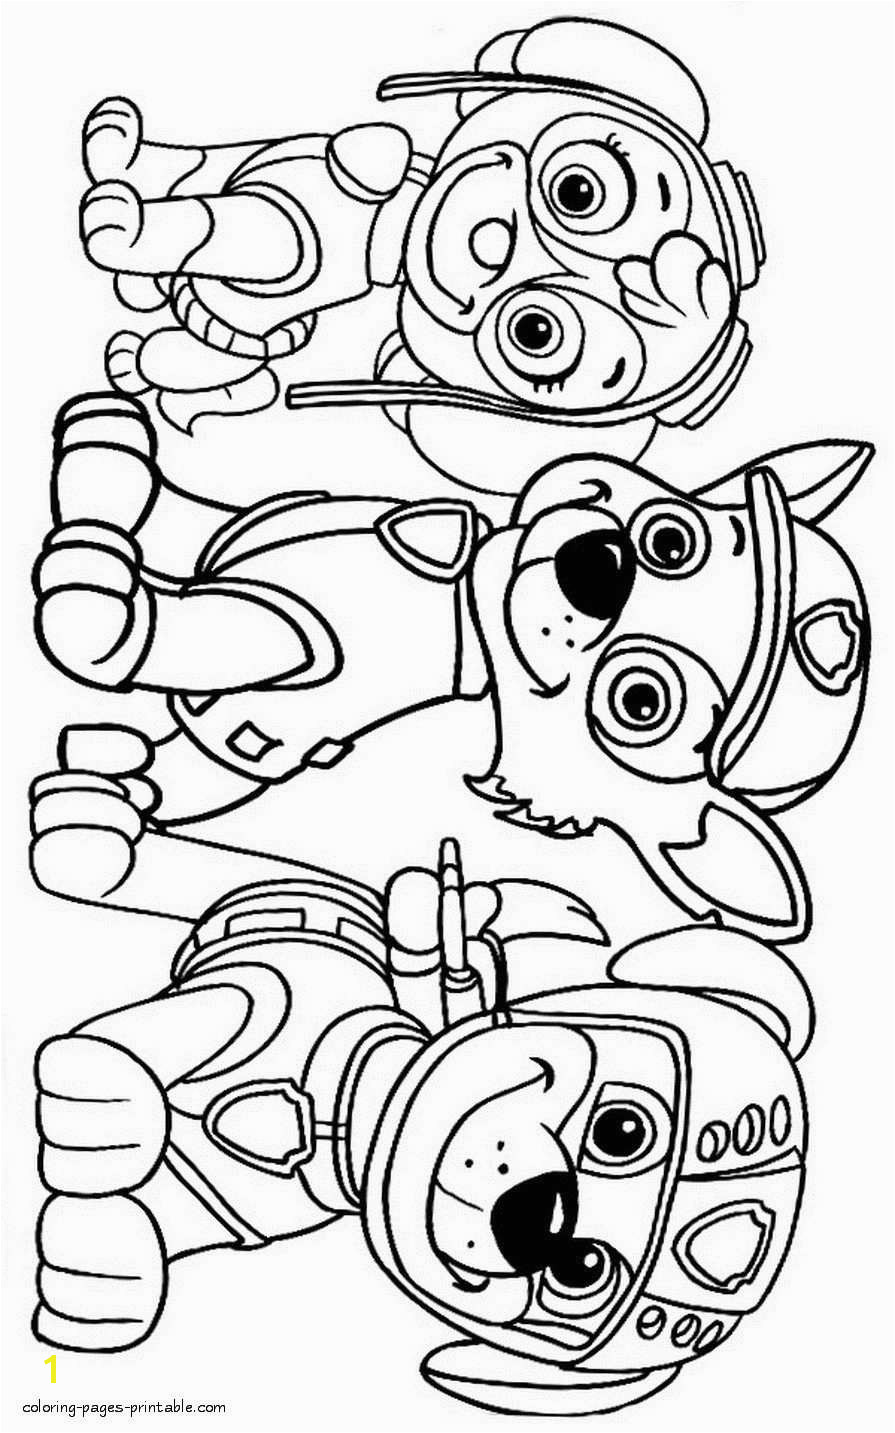 Real Puppy Coloring Pages Best Cute Printable Coloring Pages New Printable Od Dog Coloring Pages